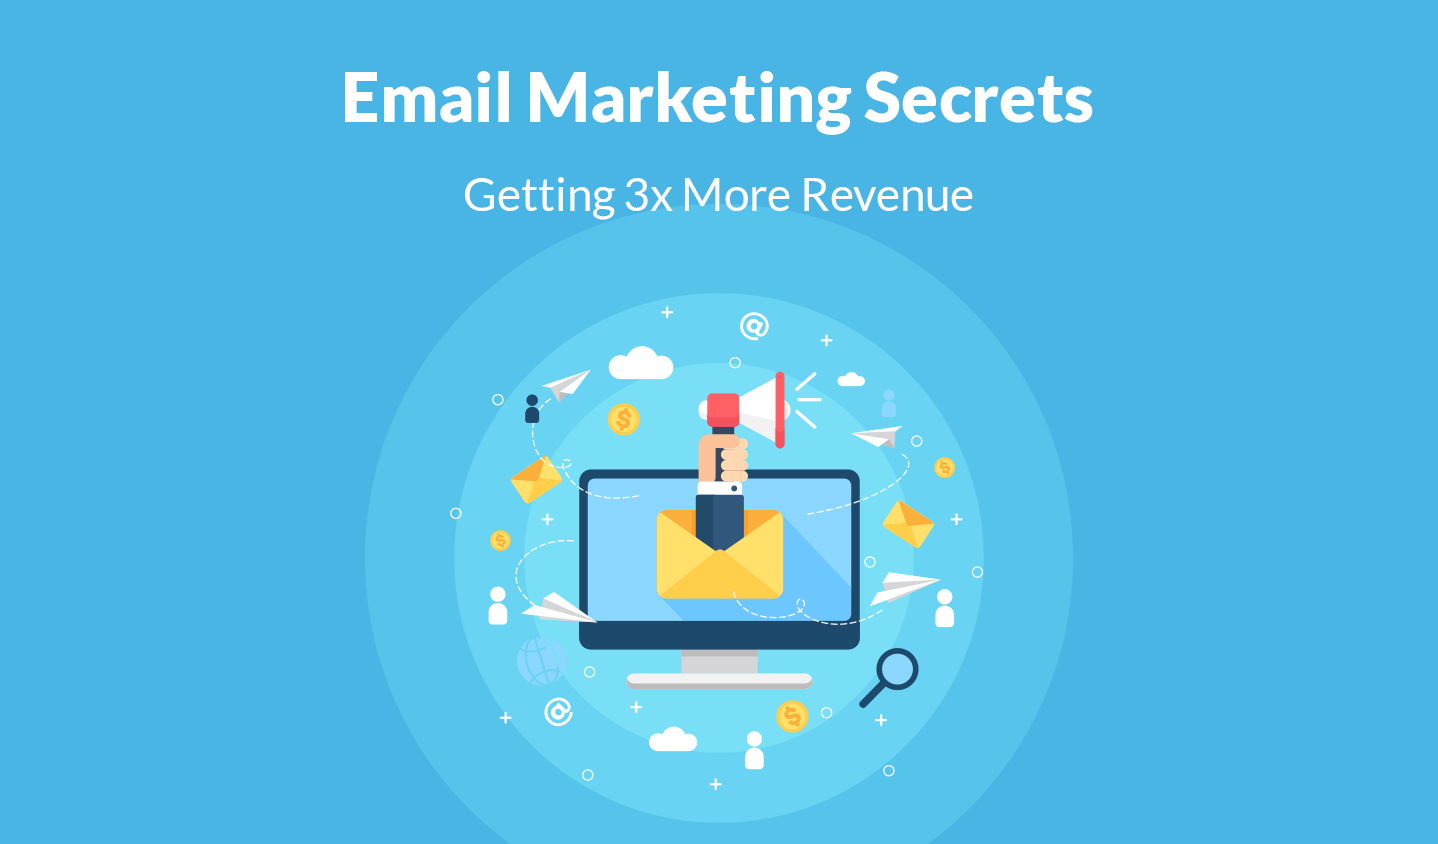 7+ Email Marketing Secrets For Getting 3x More Revenue